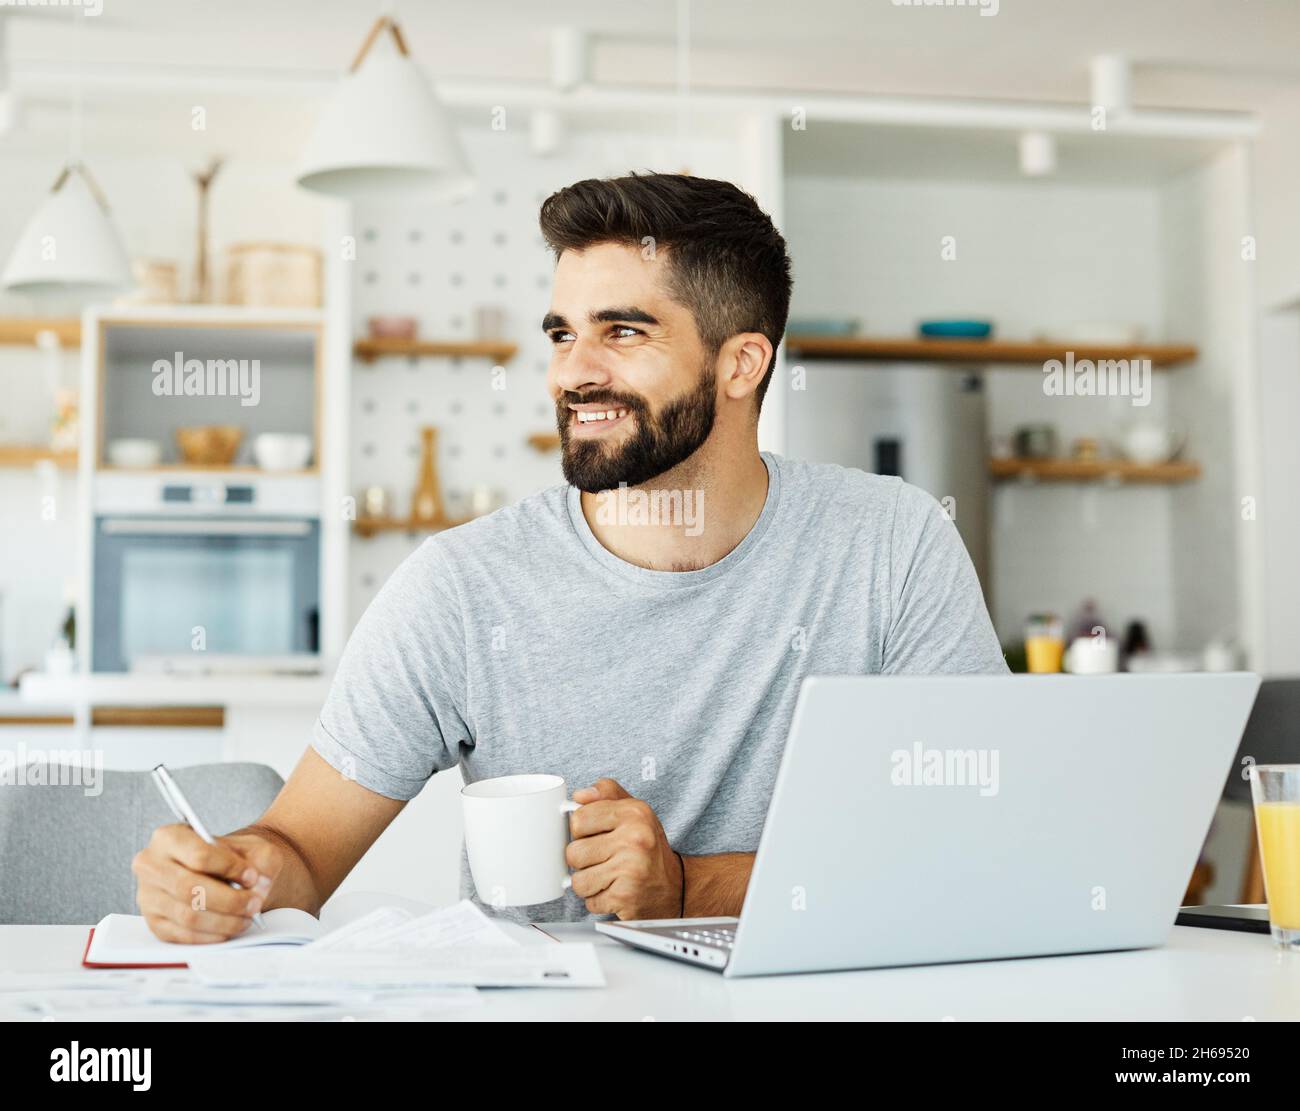 laptop man computer home technology young lifestyle business internet study indoor male reading Stock Photo